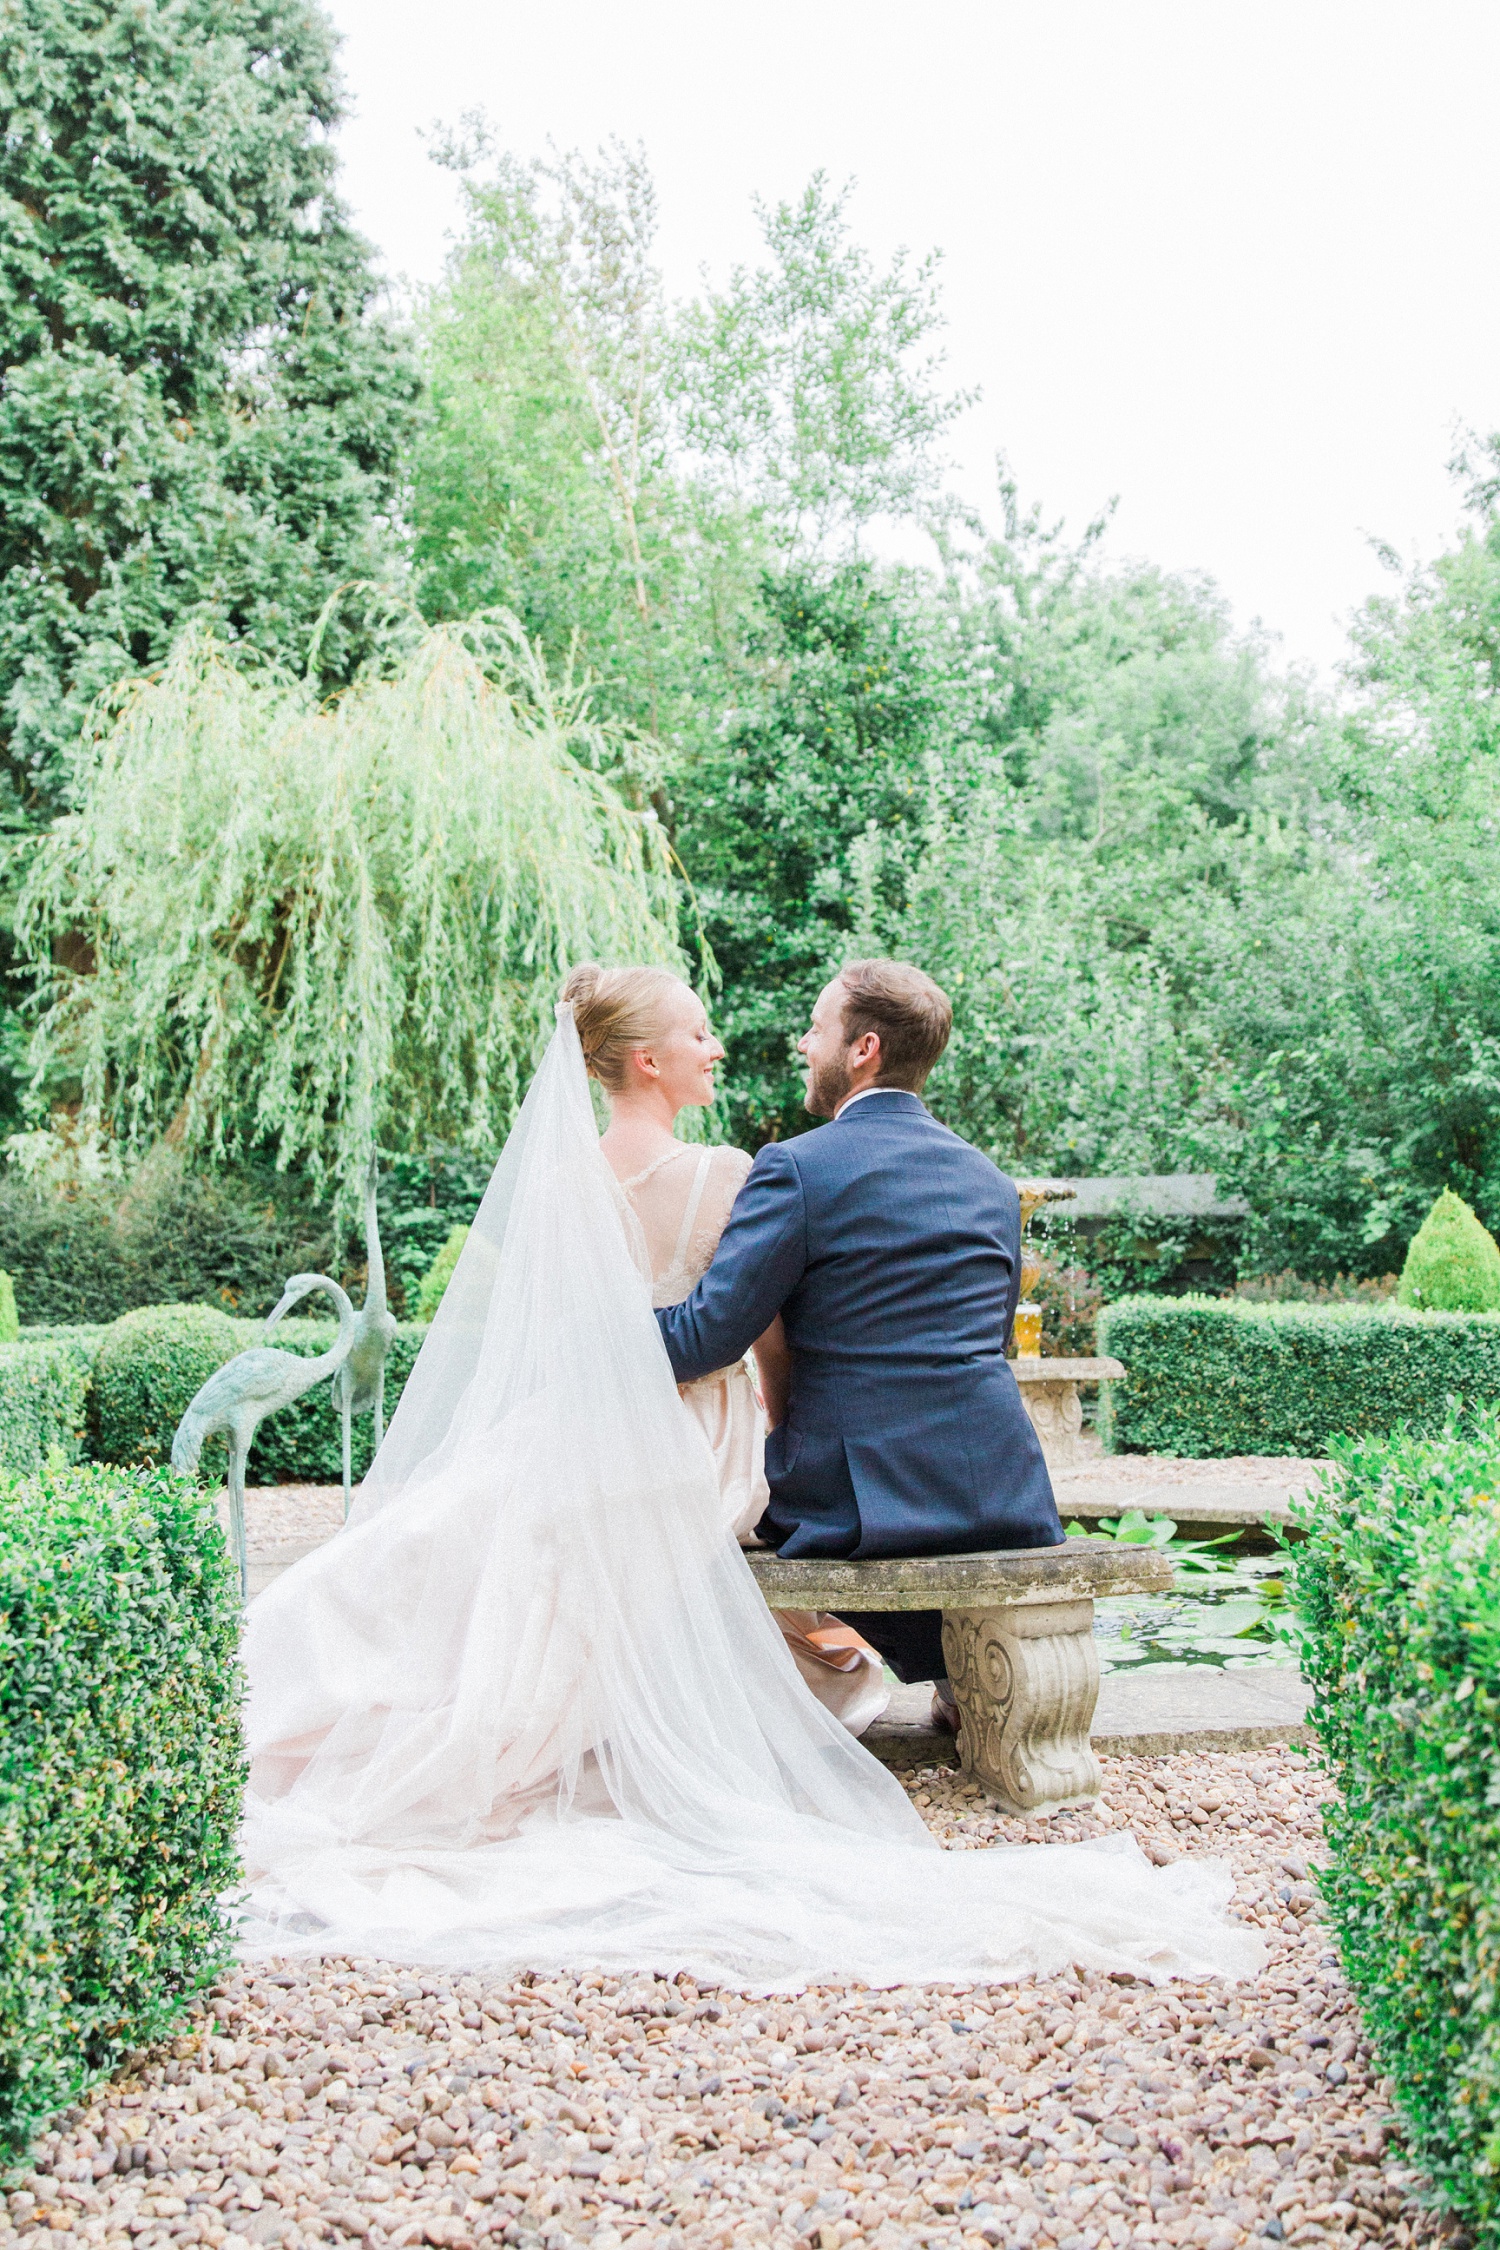 Bride and groom sit on a bench together during their English garden wedding